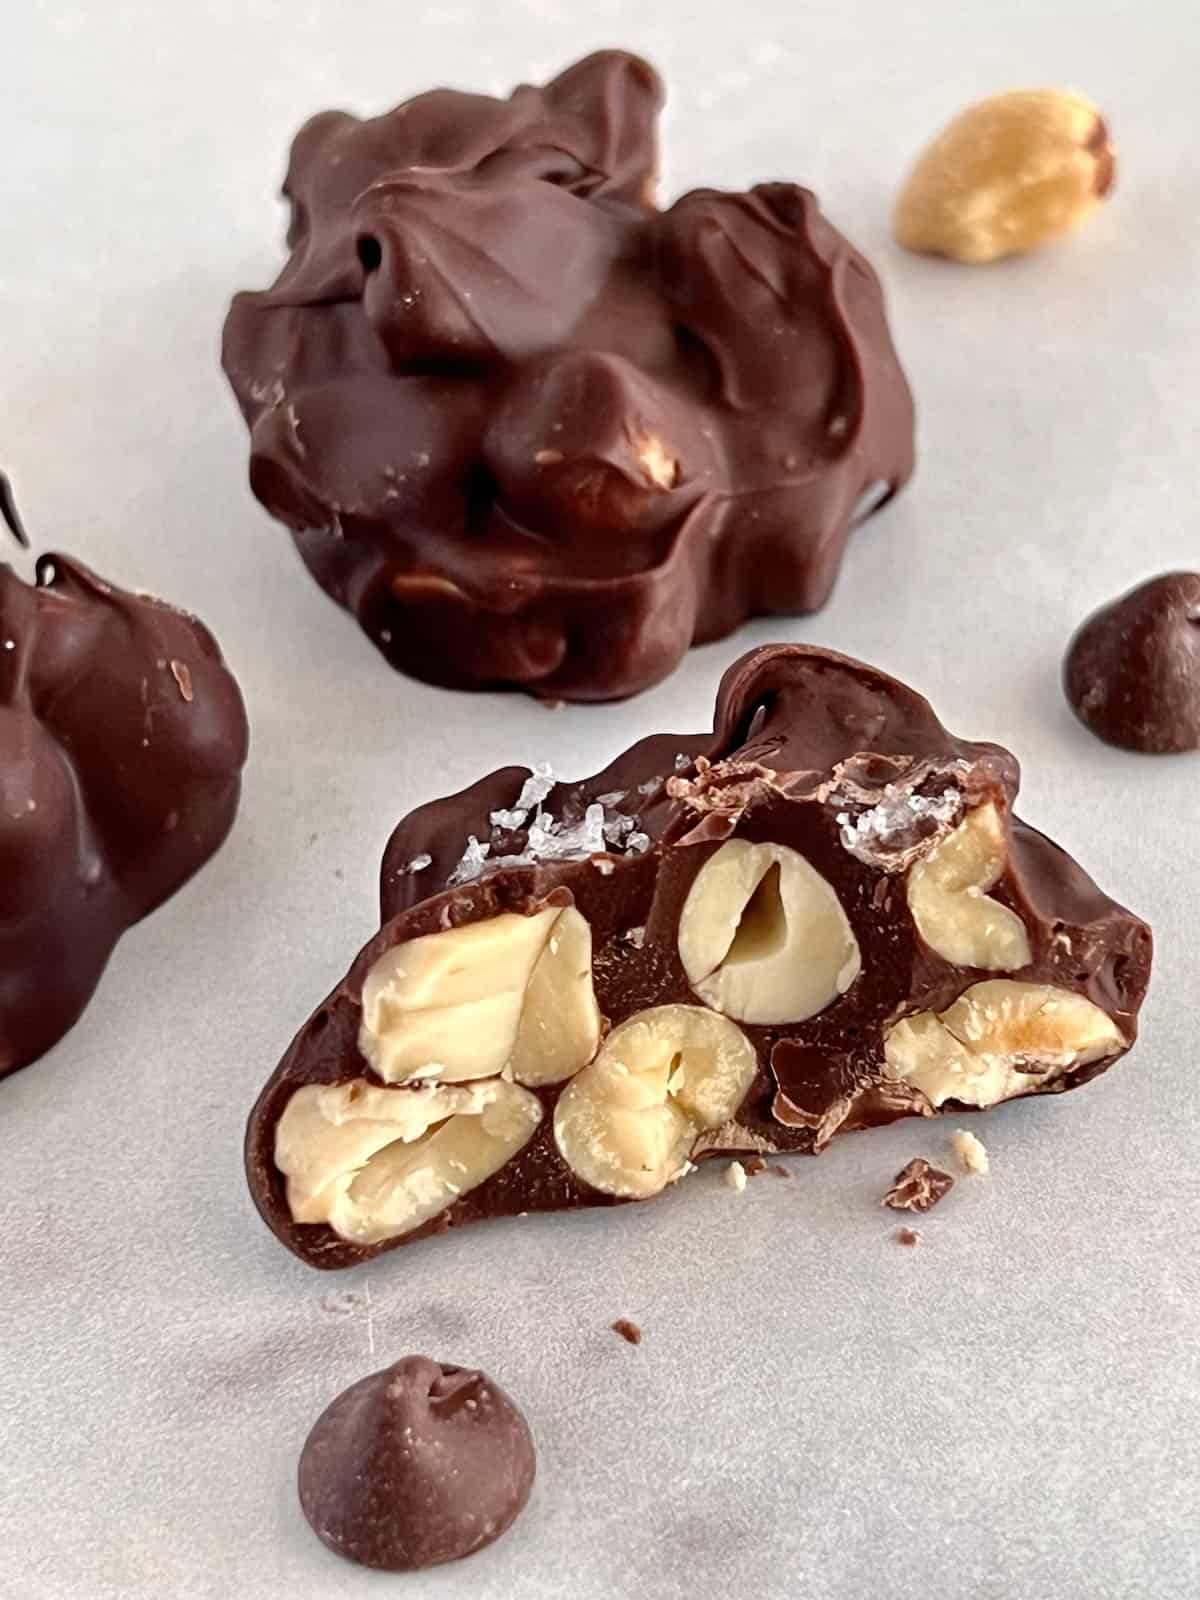 Chocolate Peanut Clusters Bitten into showing peanuts inside the chocolate covering